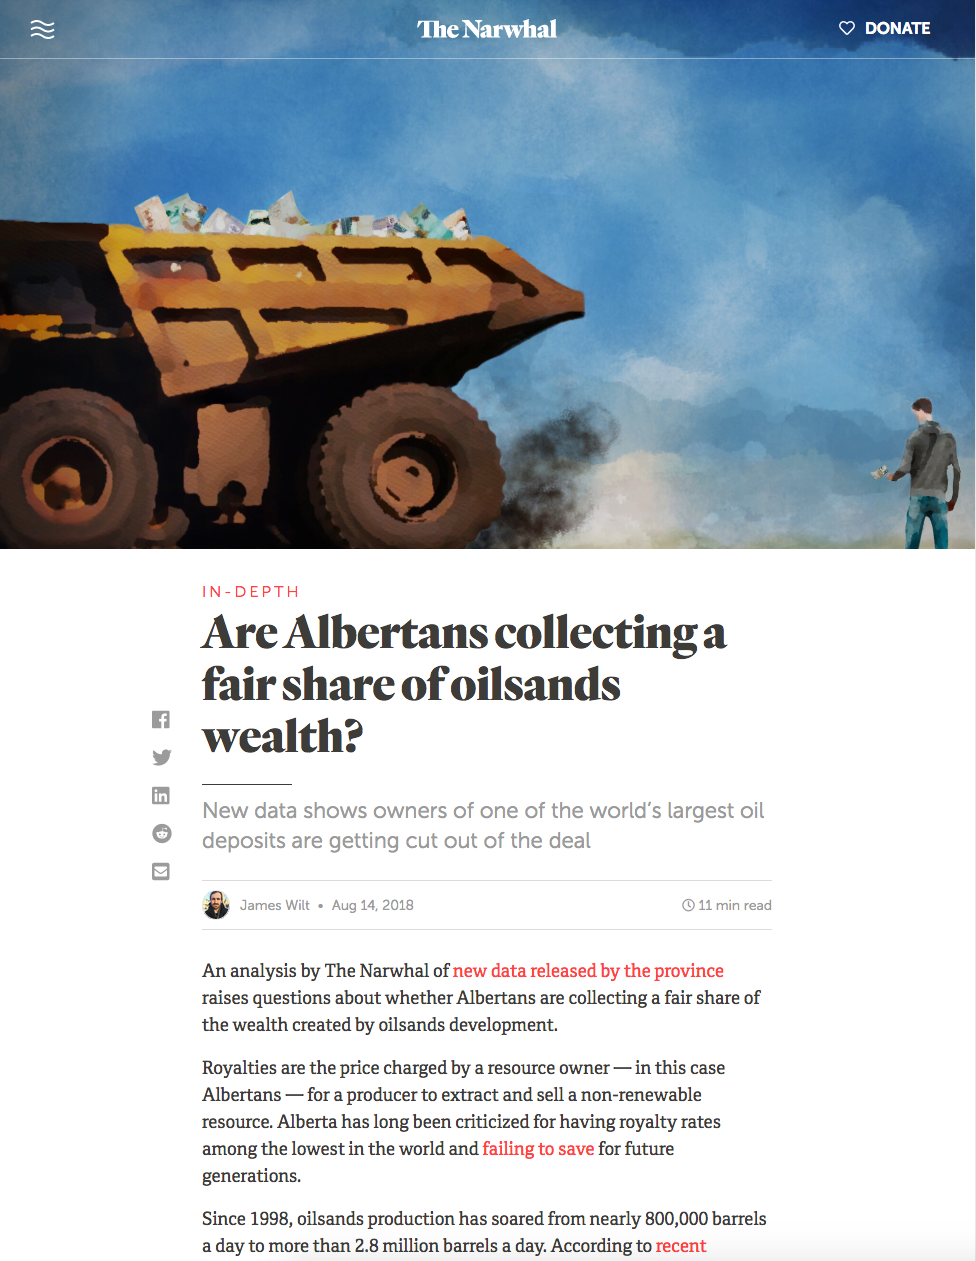 Are Albertans collecting a fair share of oilsands wealth?